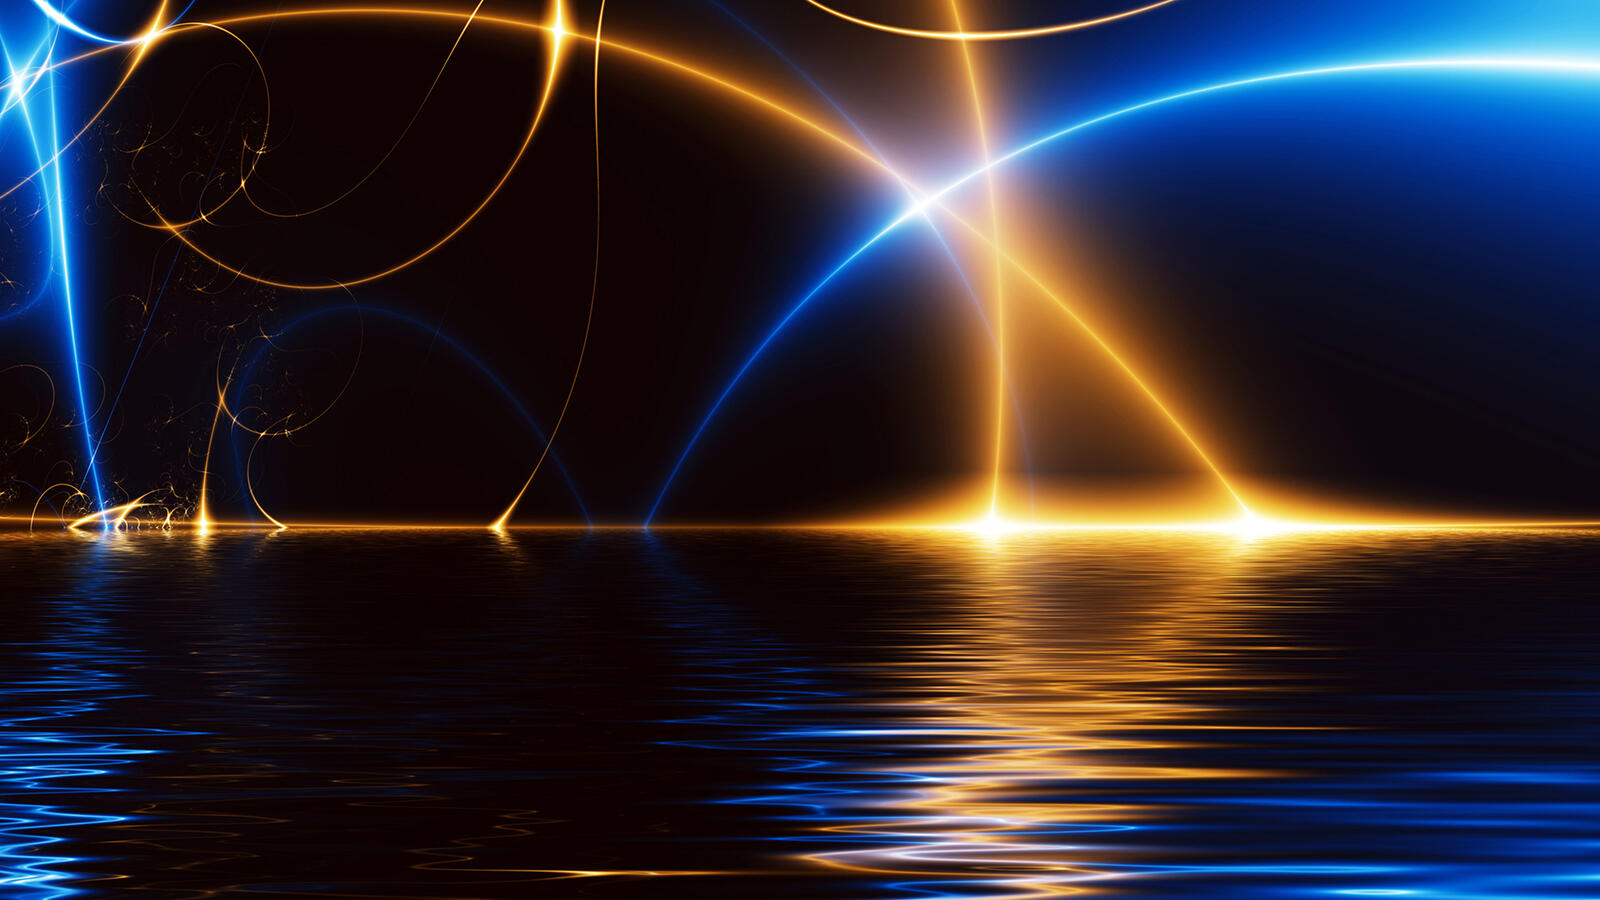 Wallpapers light water rays on the desktop